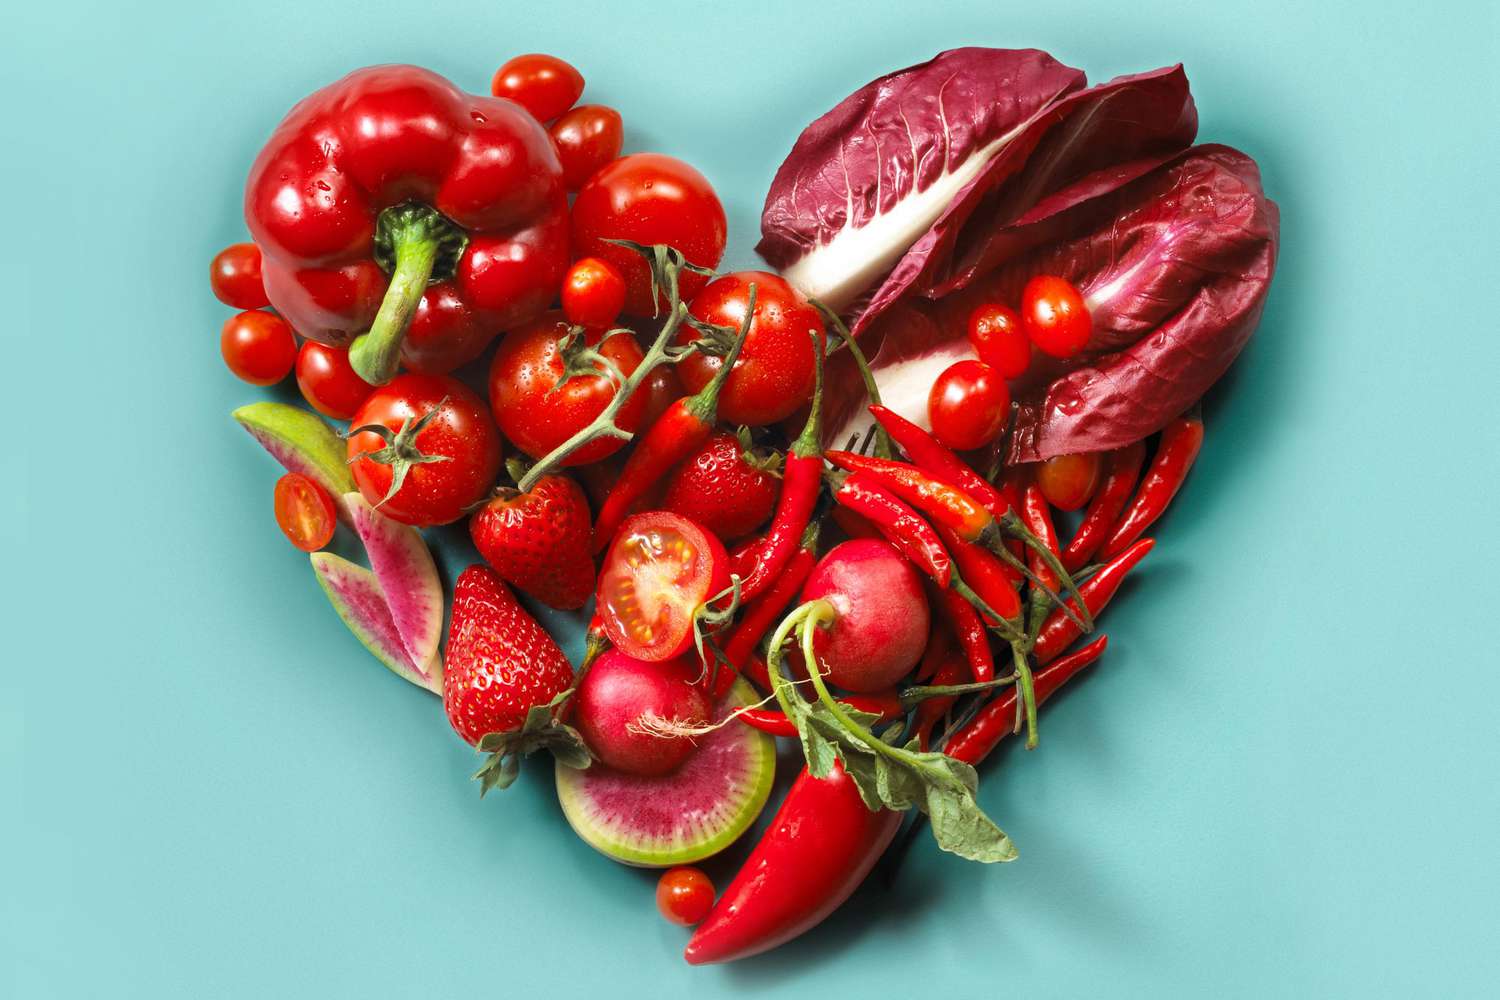 Red fruits and vegetables in the shape of a heart